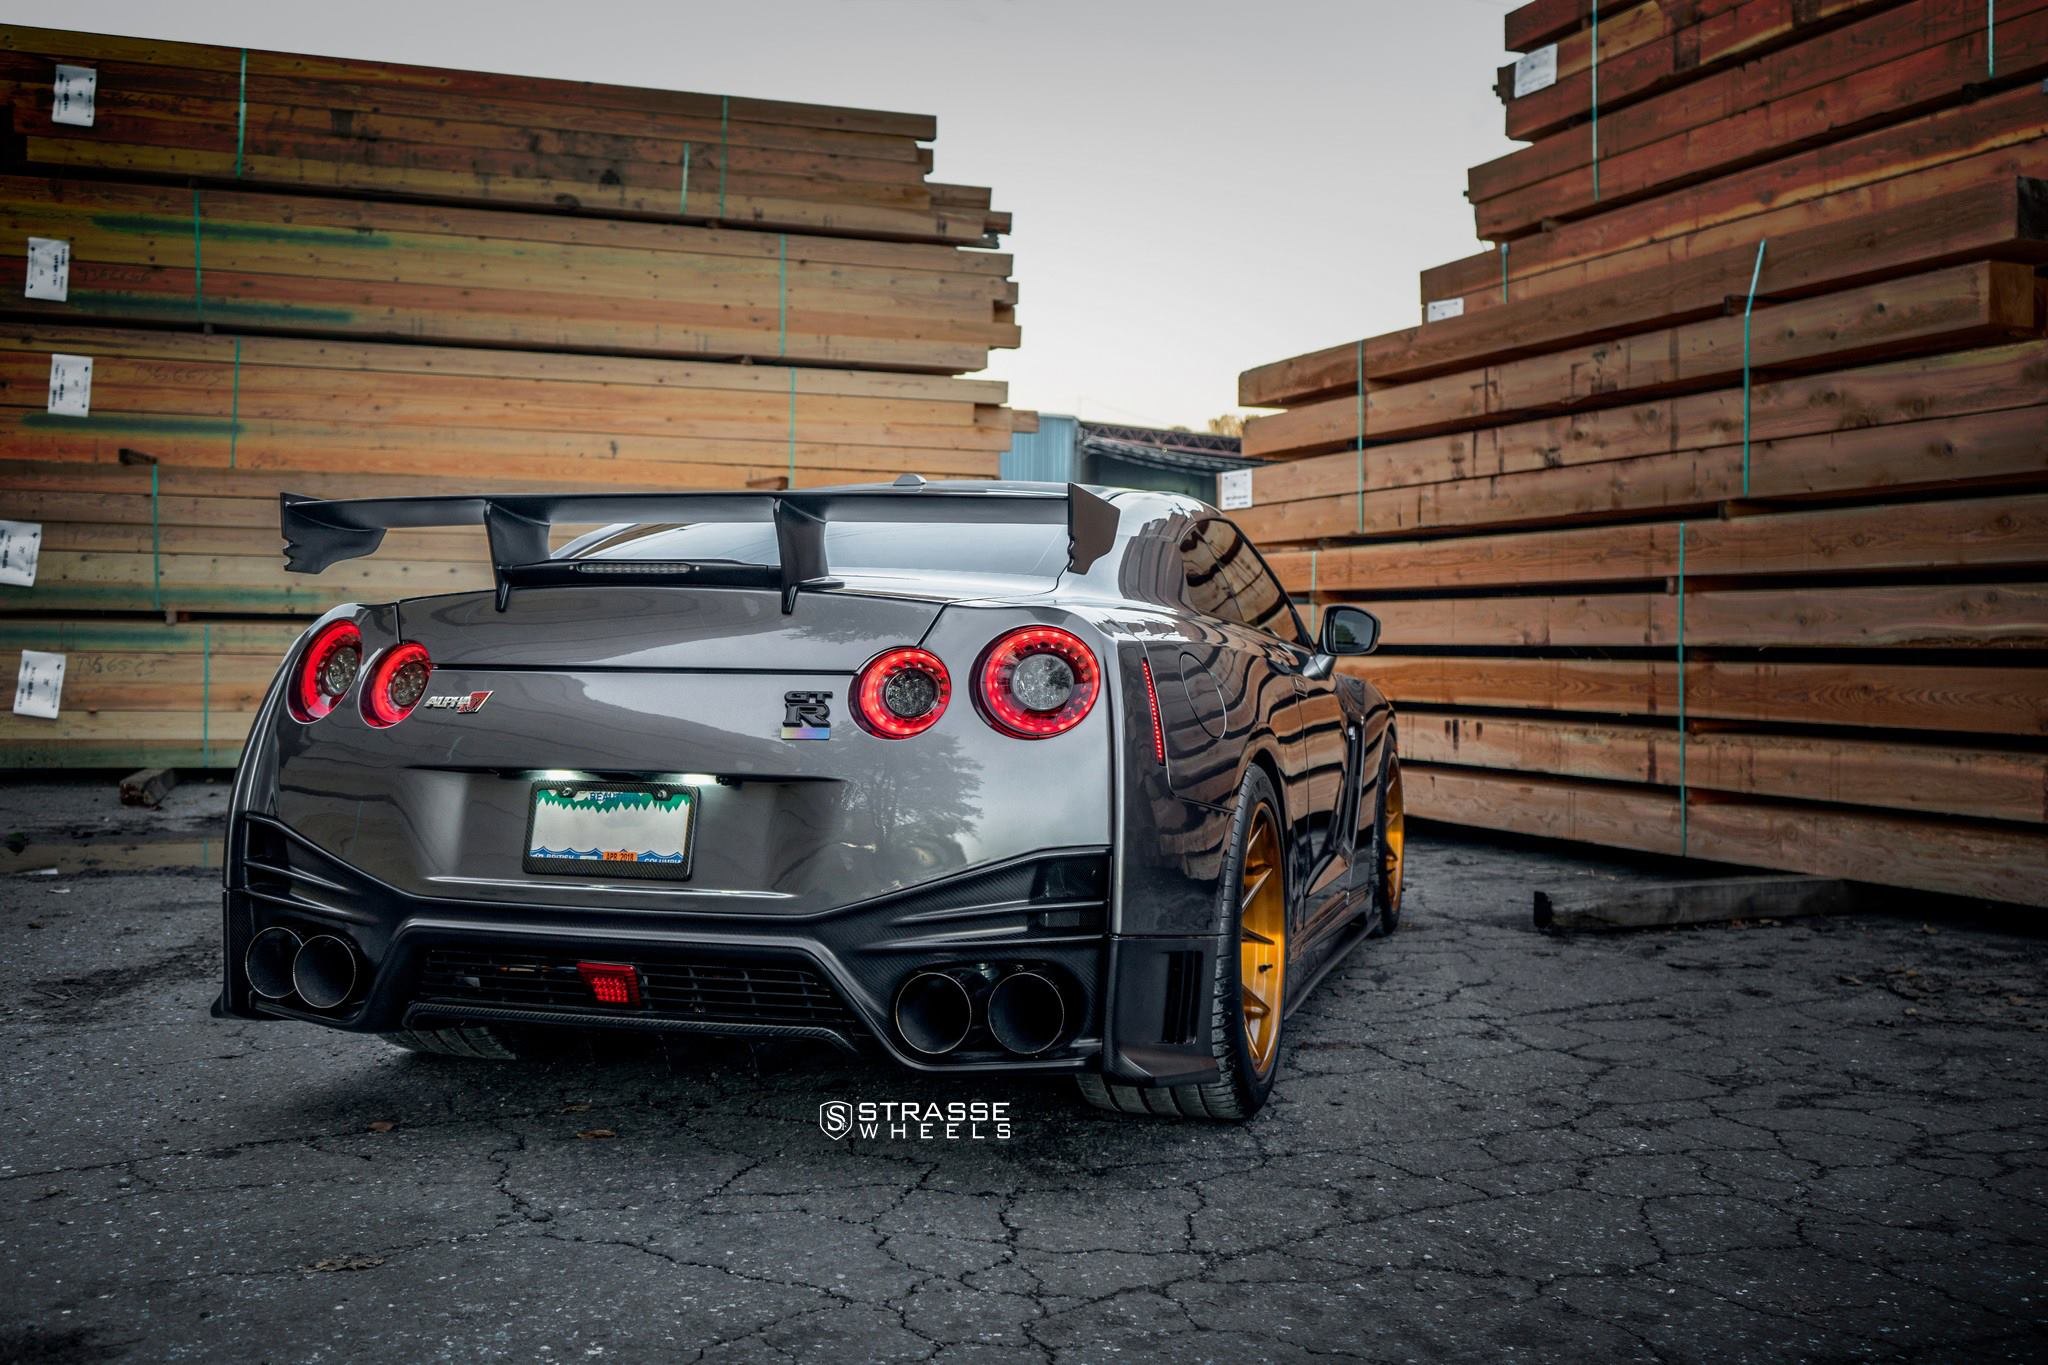 Carbon Fiber Rear Diffuser on Gray Nissan GT-R - Photo by Strasse Wheels